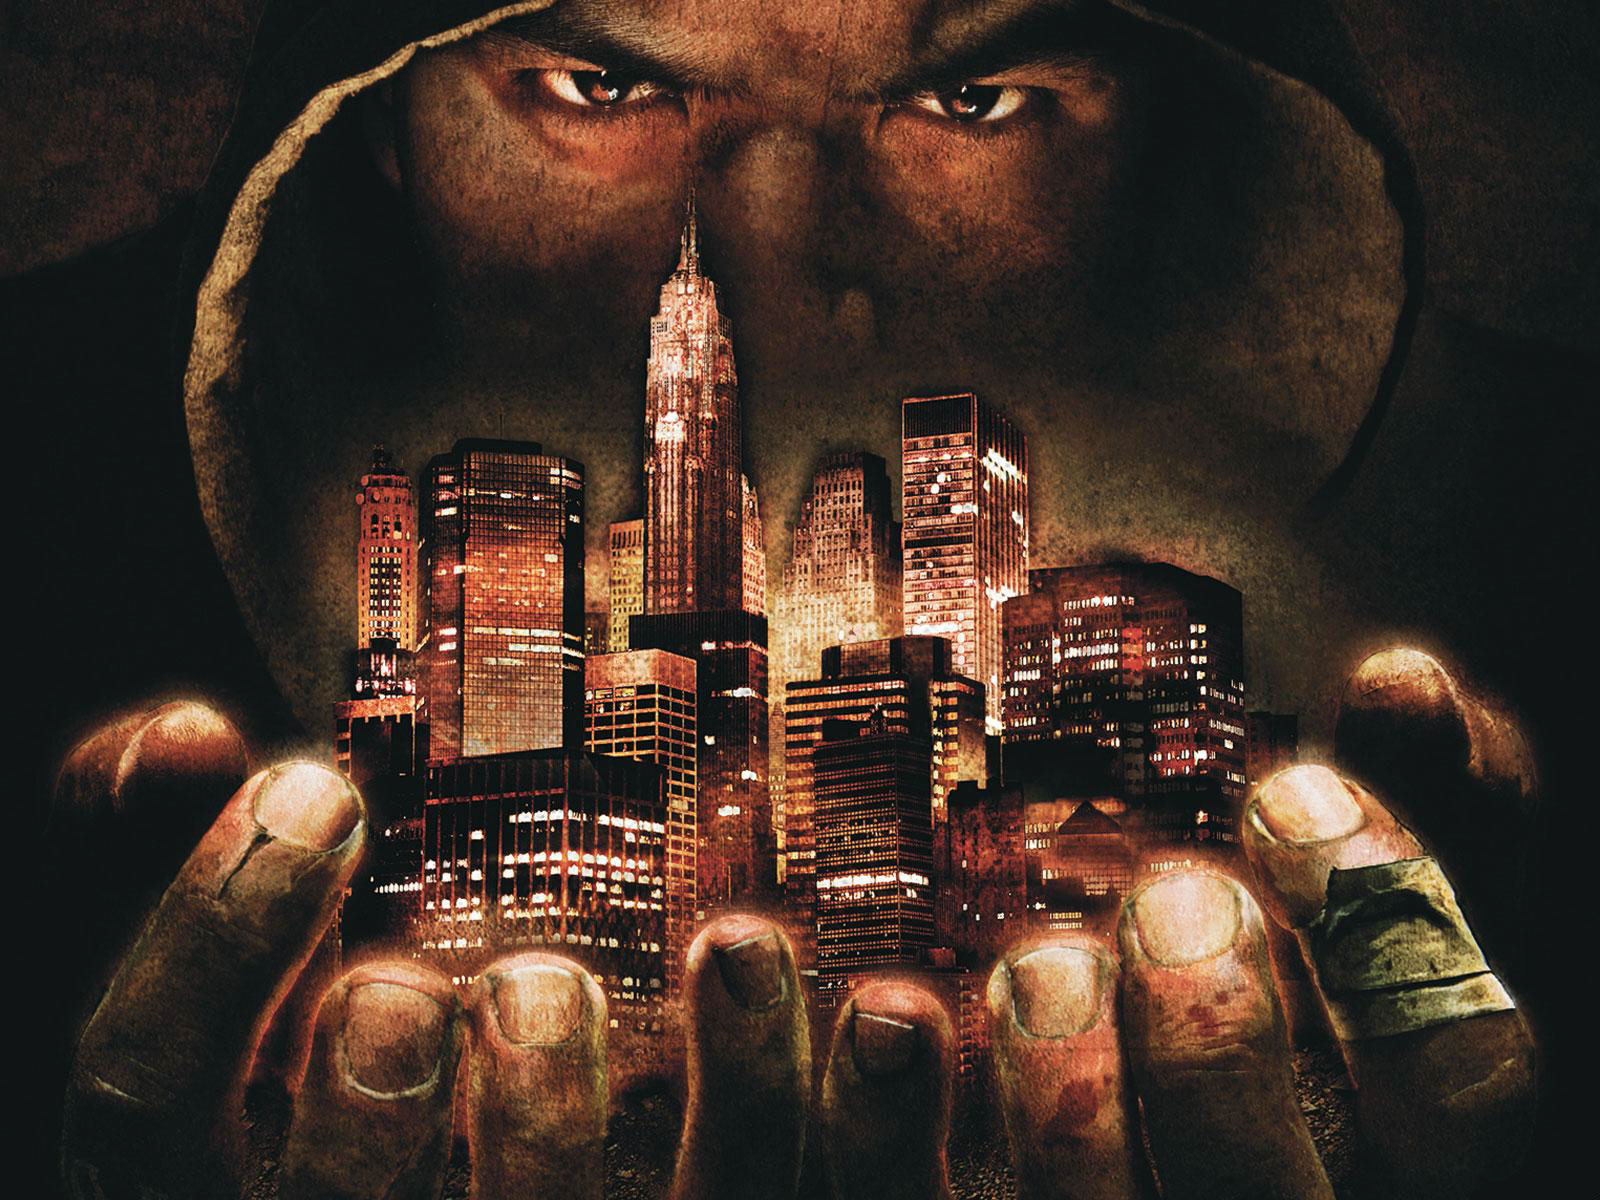 Def Jam Fight for NY: The Takeover - PSP - Review